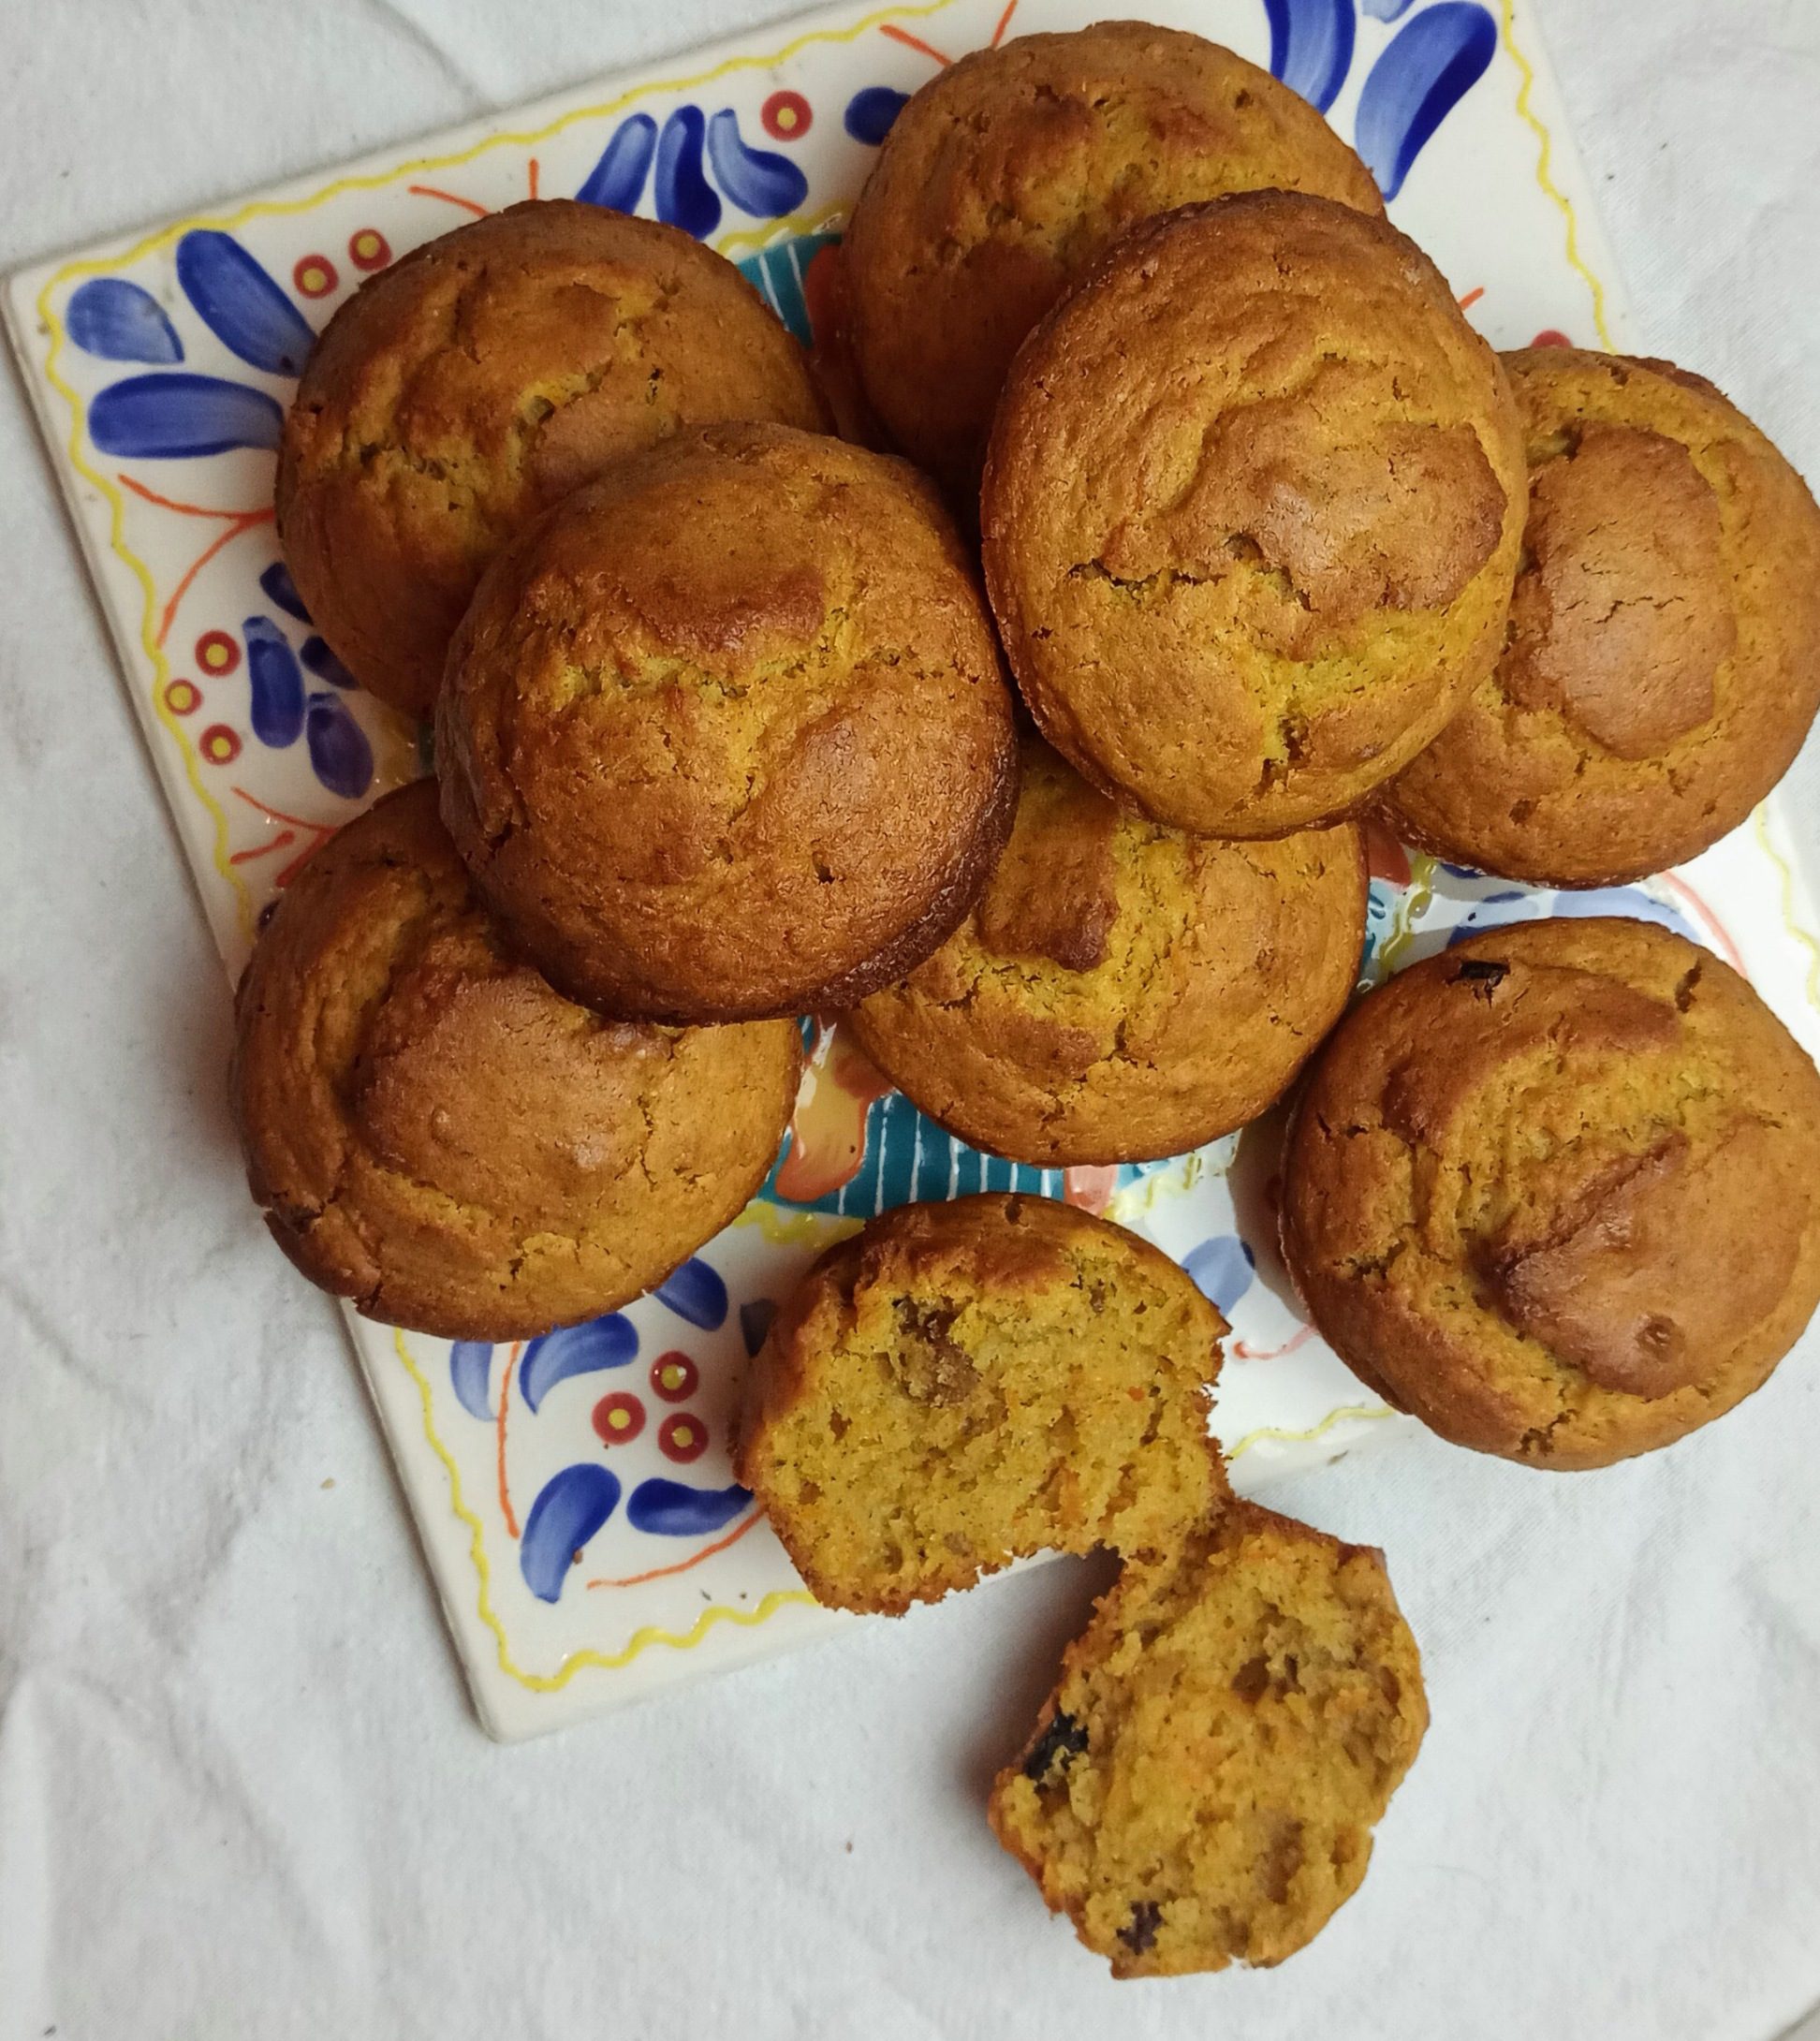 Carrot muffins make a delicious healthy snack